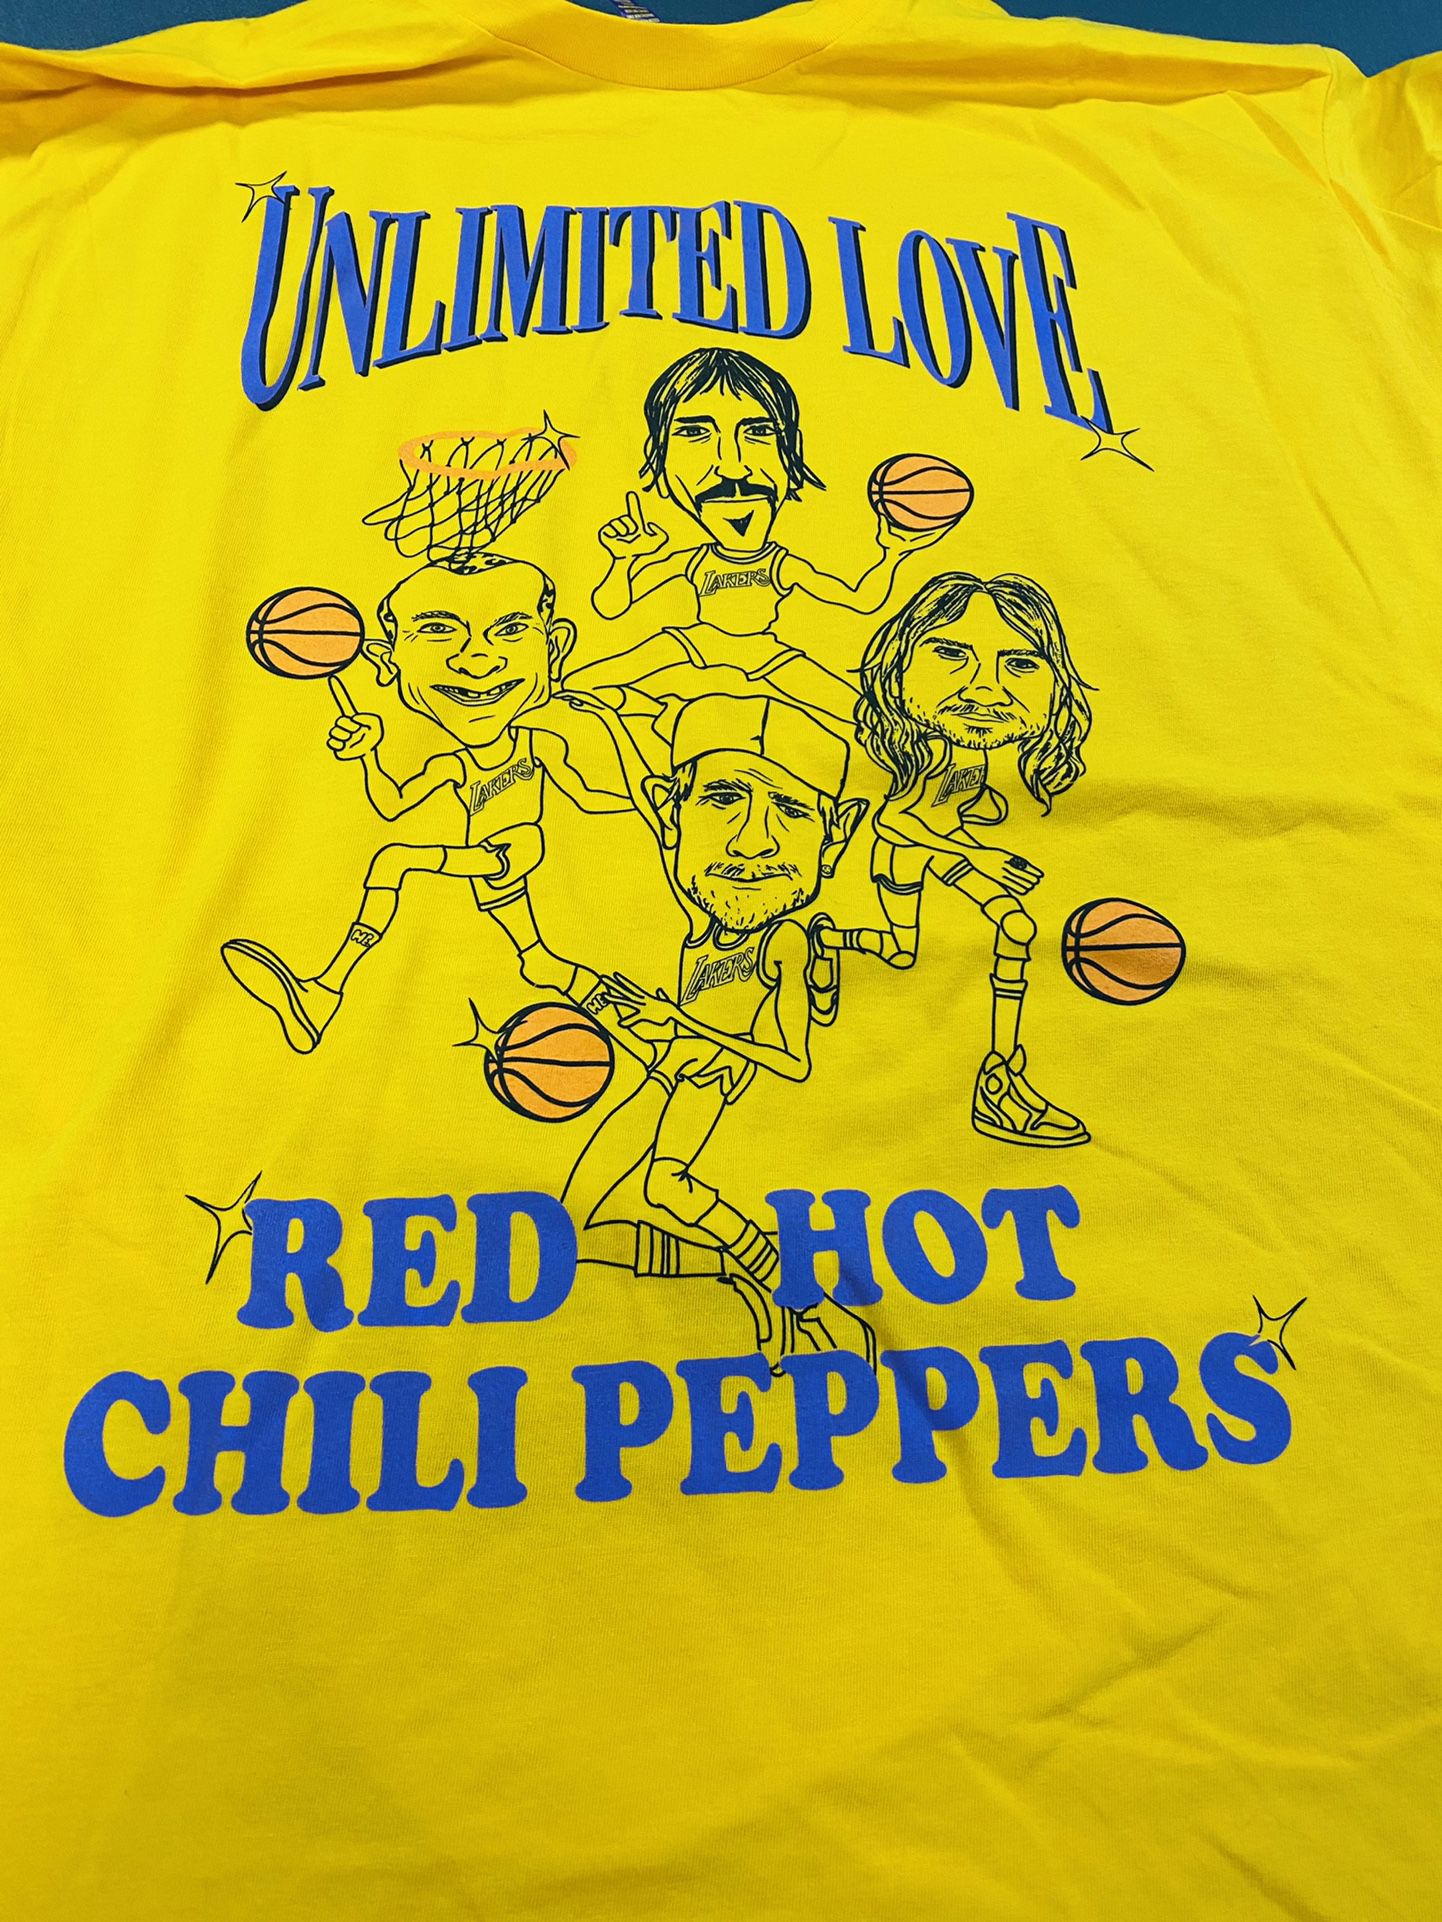 Lakers x Red Hot Chili Peppers “Unlimited Love” T-Shirt SGA for Sale in  South Pasadena, CA - OfferUp